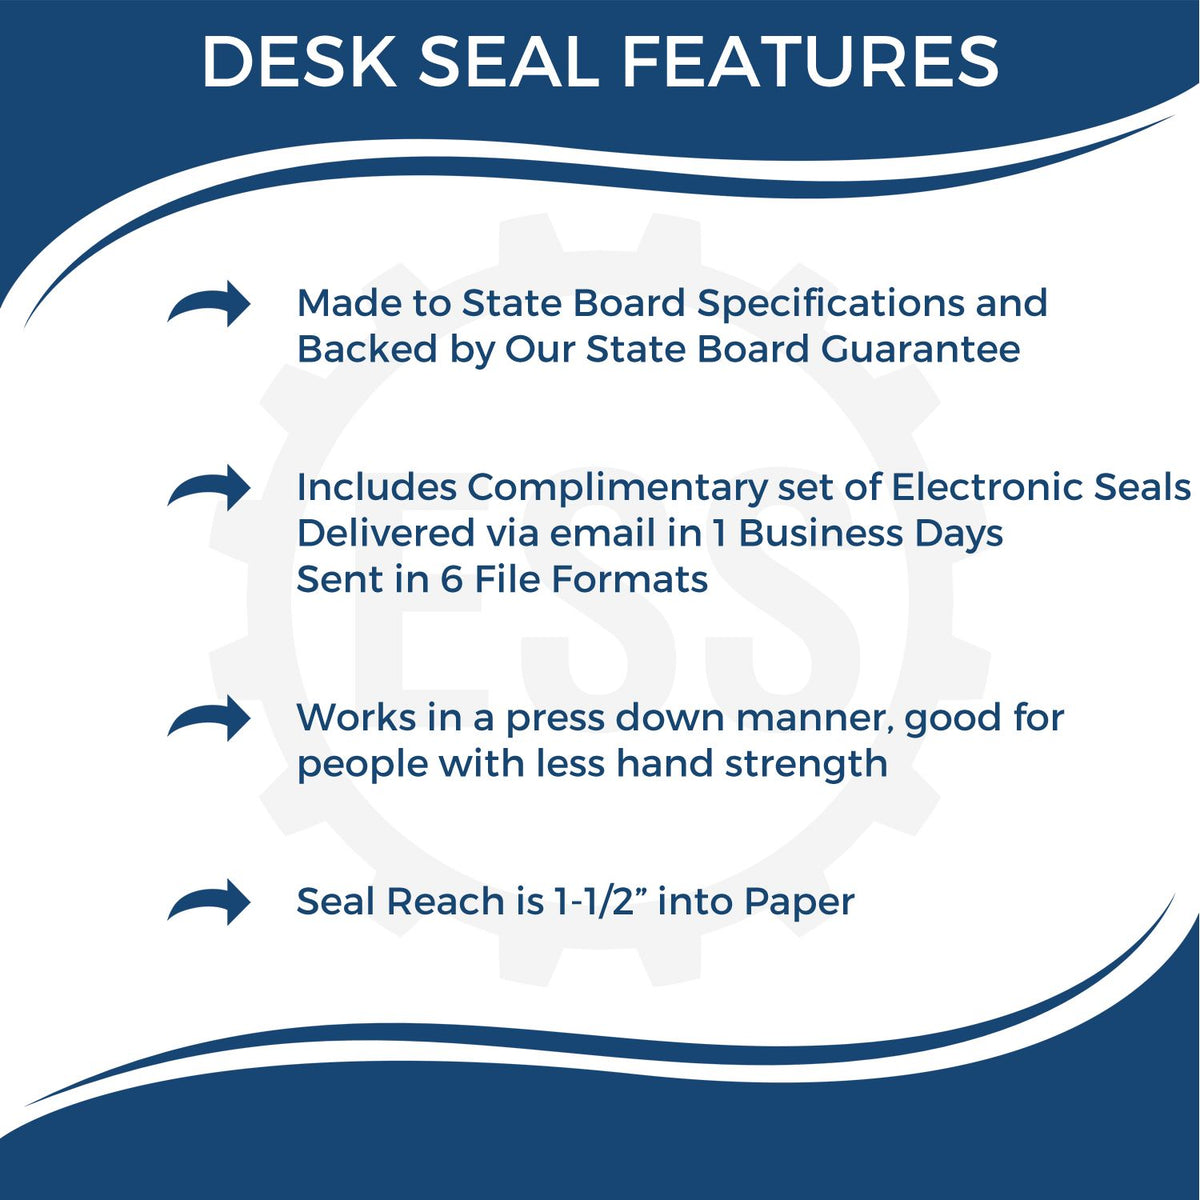 A picture of an infographic highlighting the selling points for the Florida Engineer Desk Seal